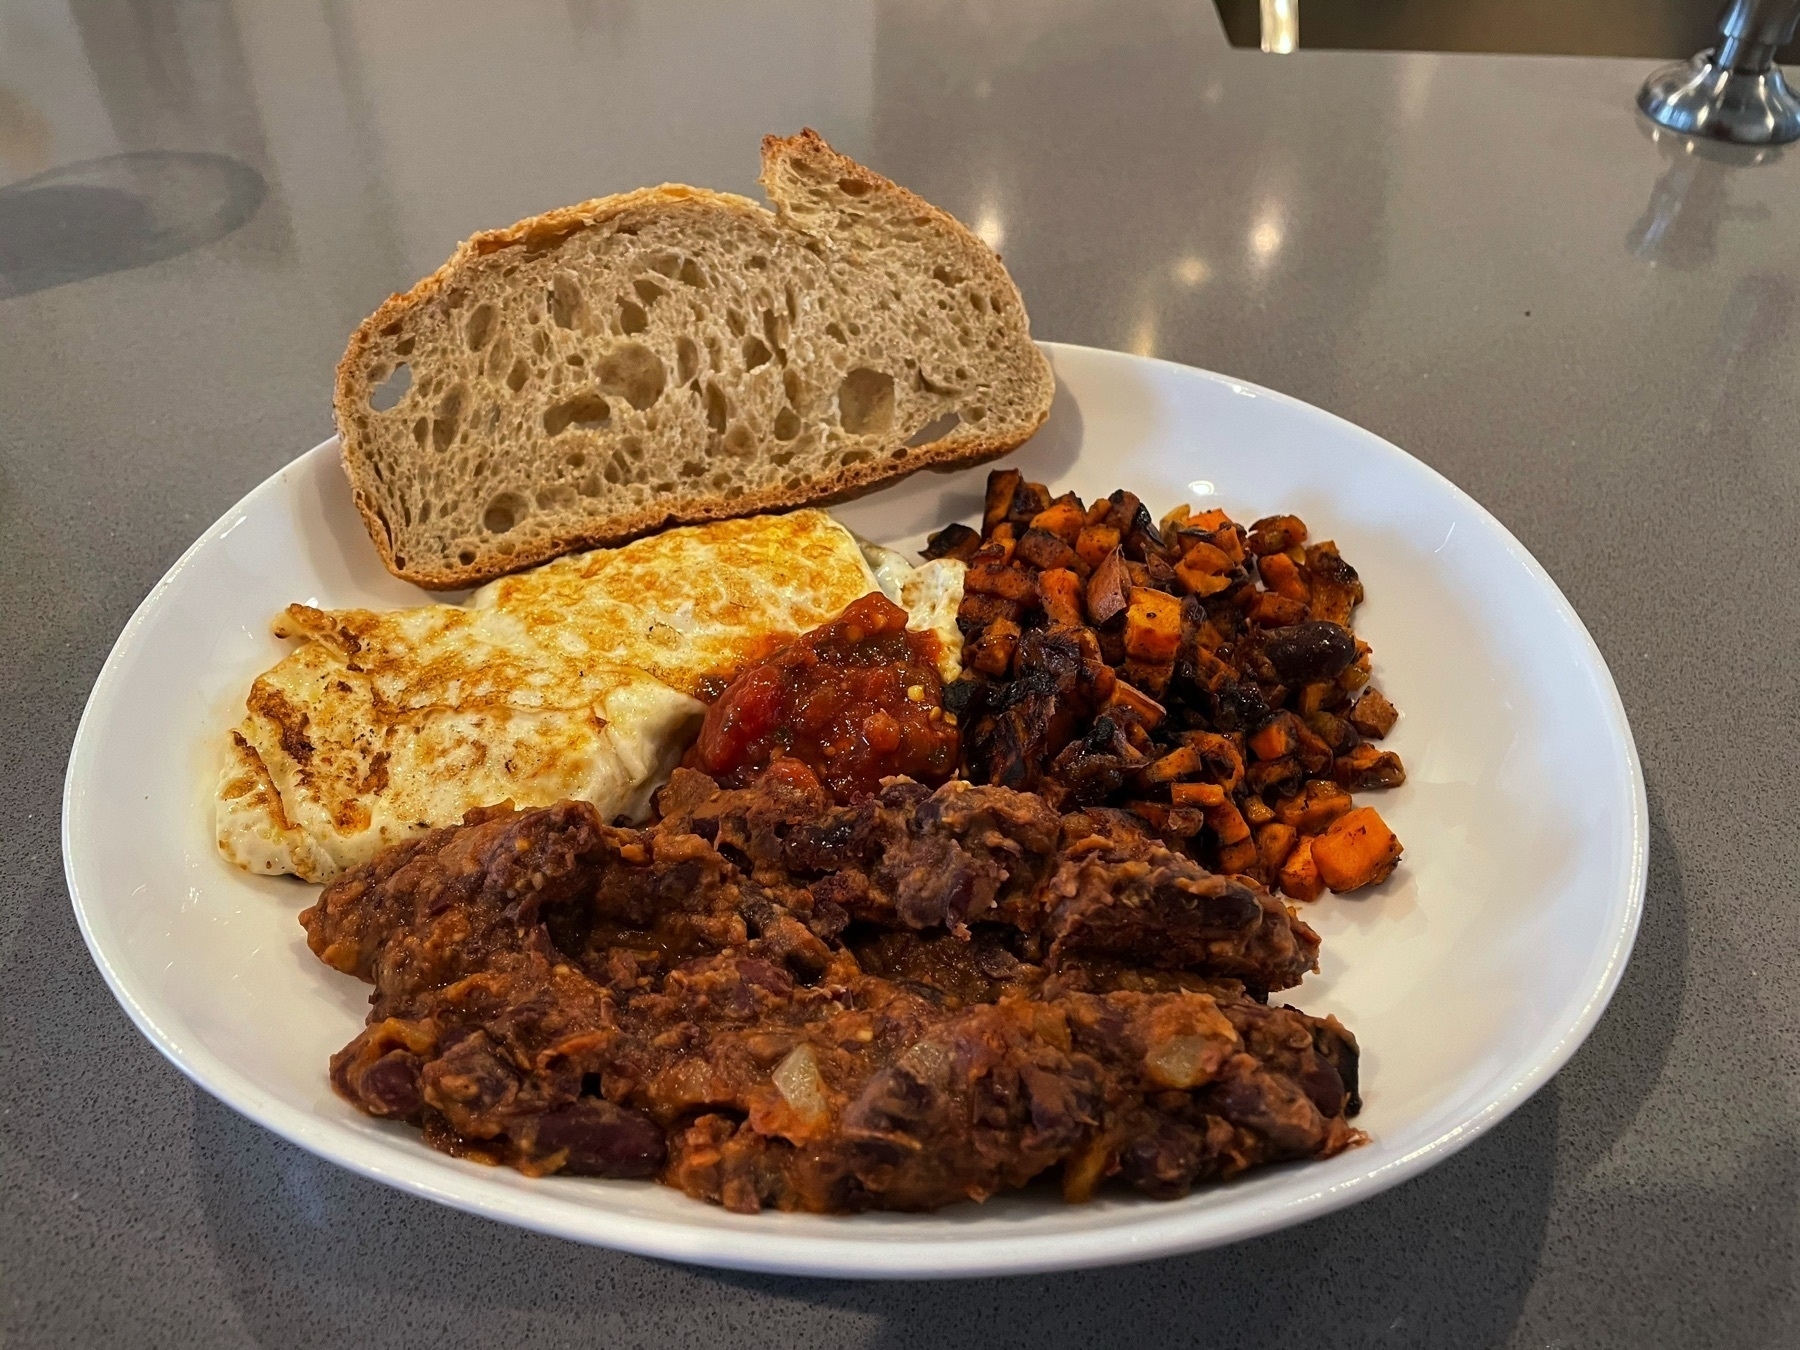 Breakfast plate with two eggs, sweet potato hash, beans, and a slice of sourdough.